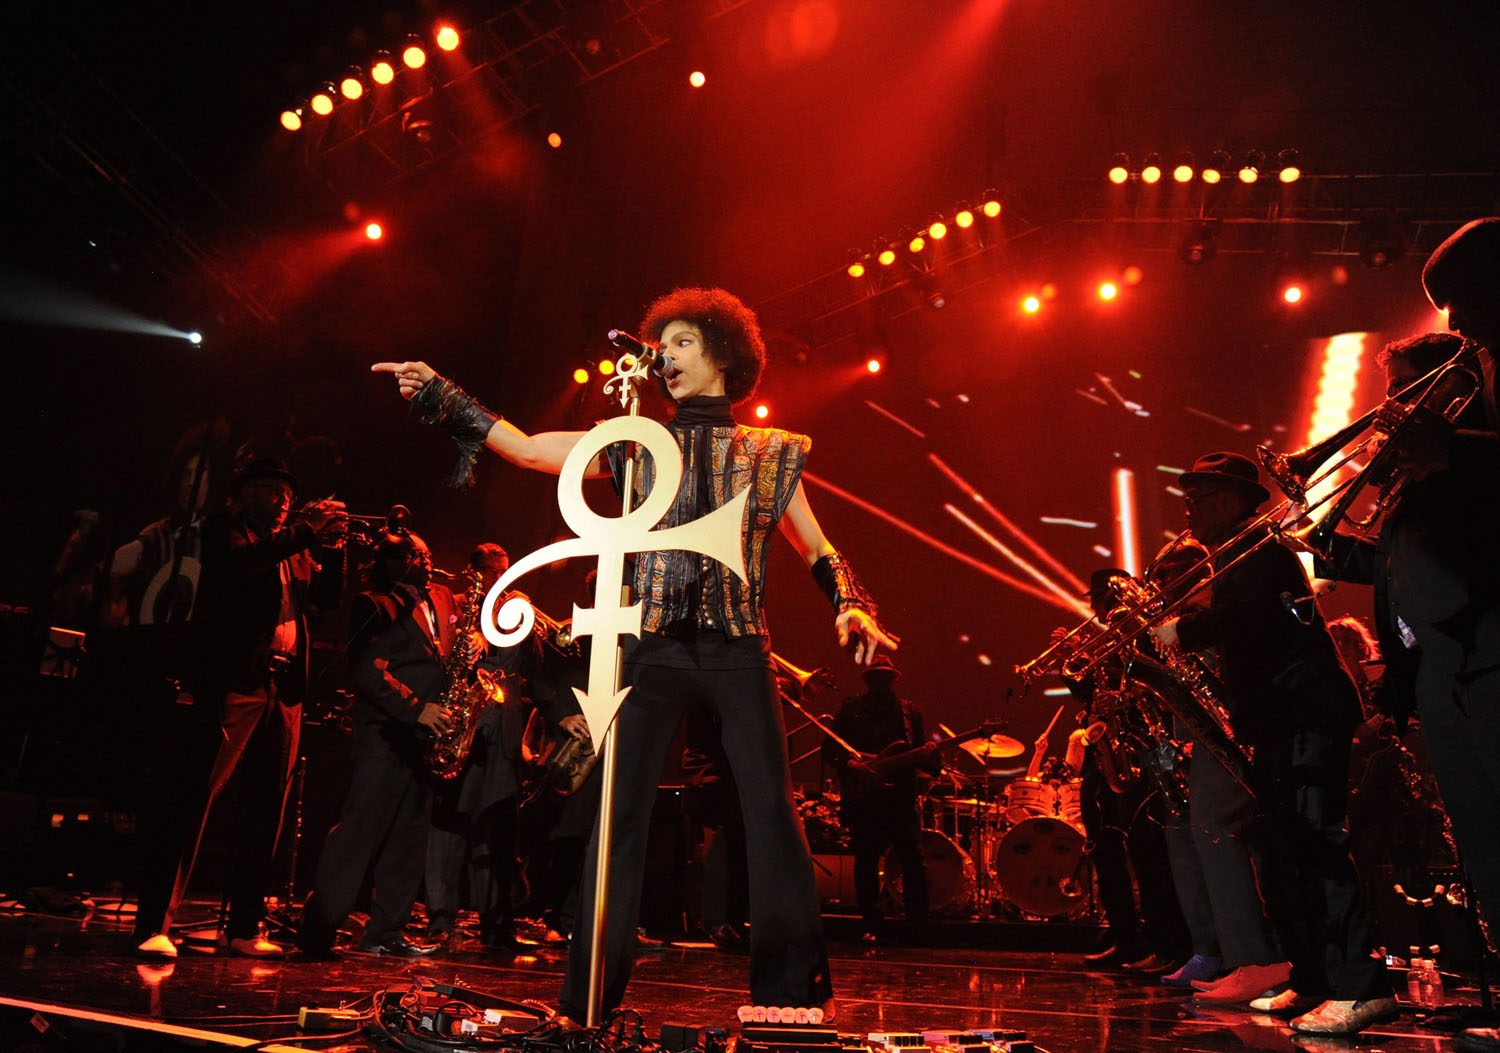 Prince performs at Mohegan Sun Arena on Dec. 29, 2013 in Uncasville, Connecticut. (Kevin Mazur)